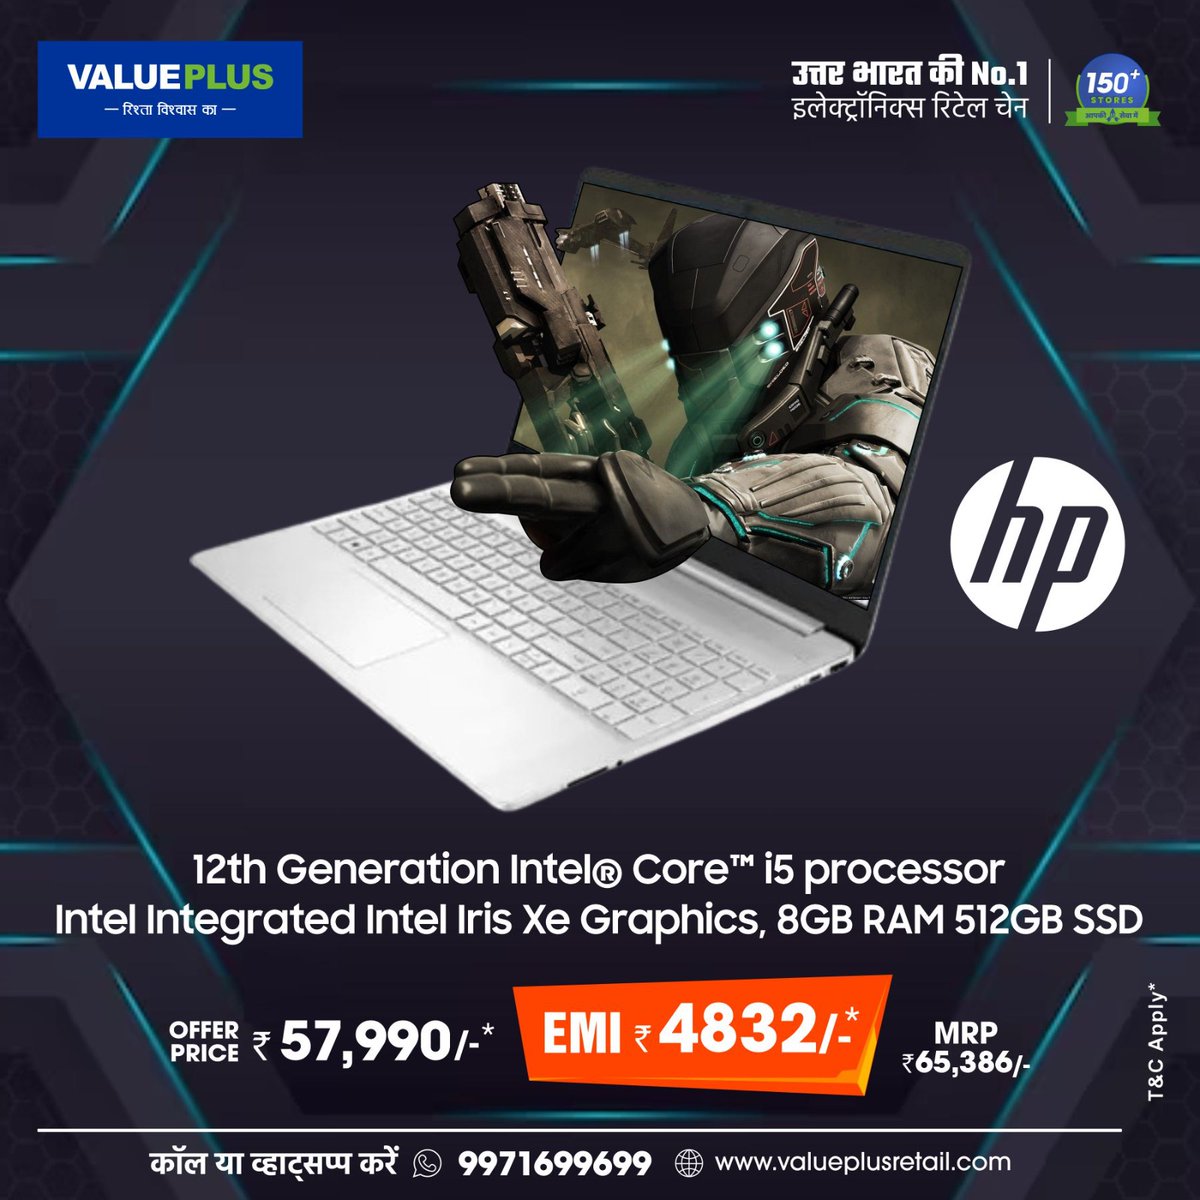 More than just a laptop, this HP laptop is your gateway to productivity and entertainment.

Don't wait, secure yours today!

Buy Now!

Visit Value Plus stores today
Or call us 9971699699, or checkout valueplusretail.com 🙏
T&C Apply*
#Valueplus #hplaptop #hpenvy #DDR4Memory